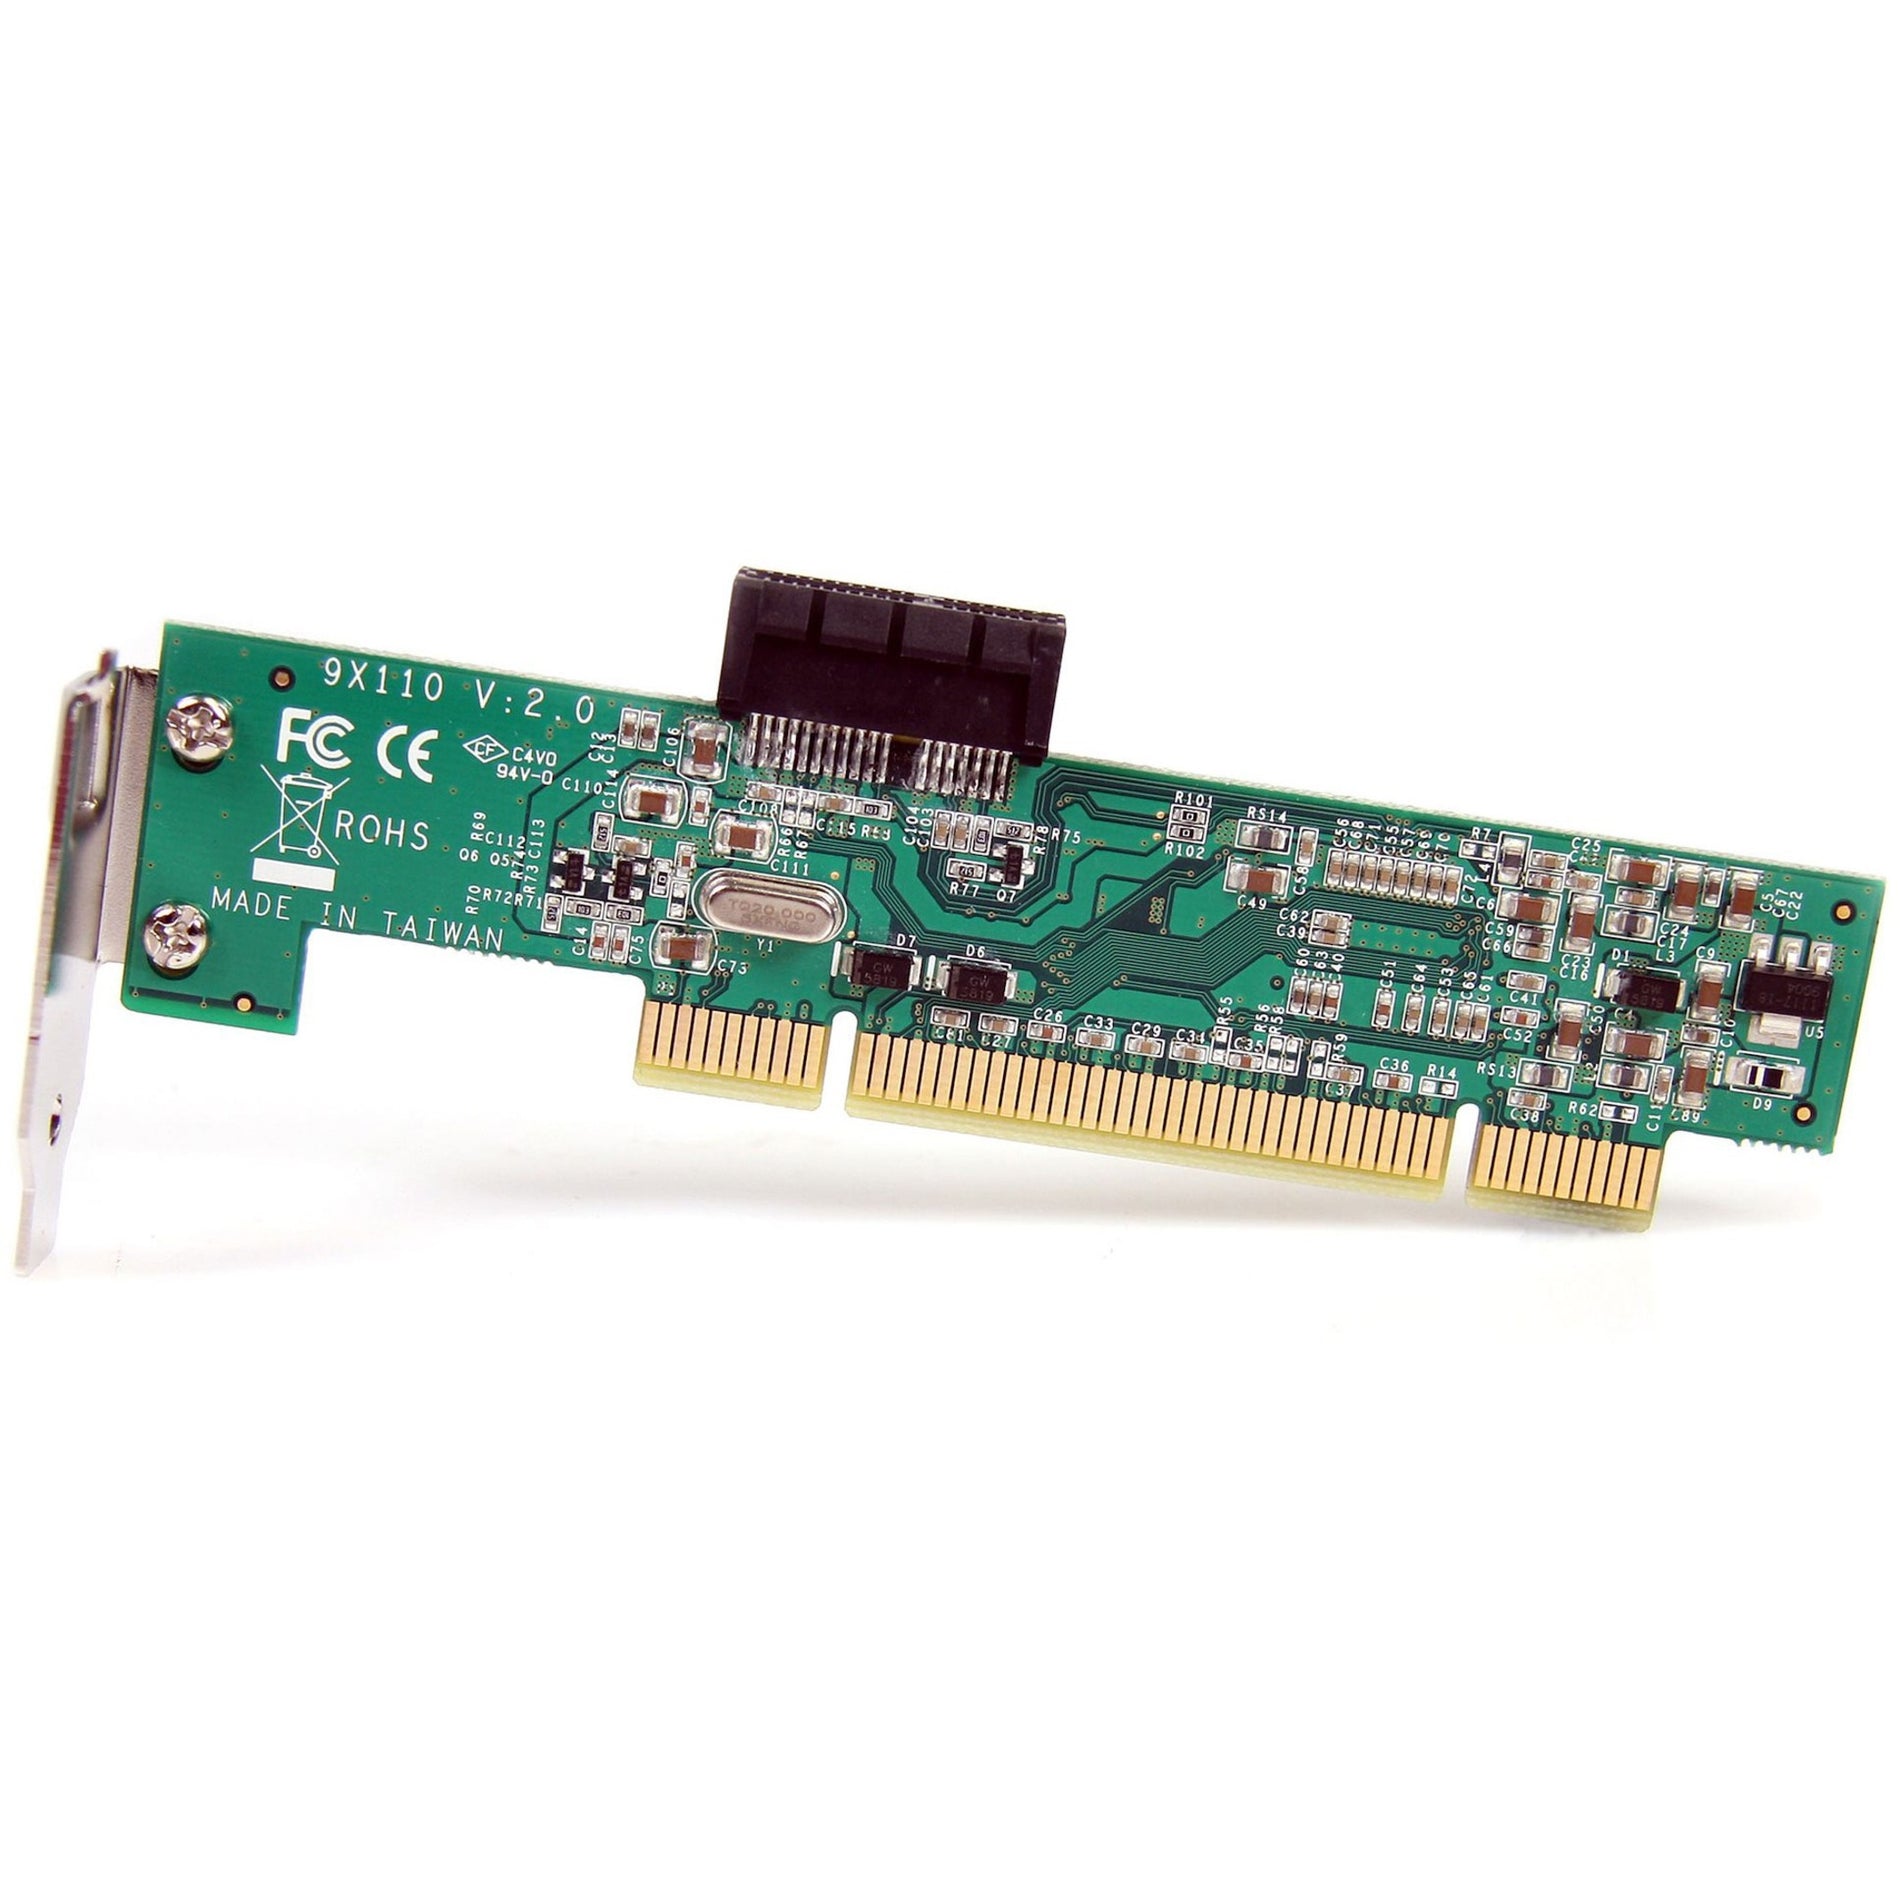 StarTech.com PCI1PEX1 PCI to PCI Express Adapter Card, Low-profile Expansion Slot Type